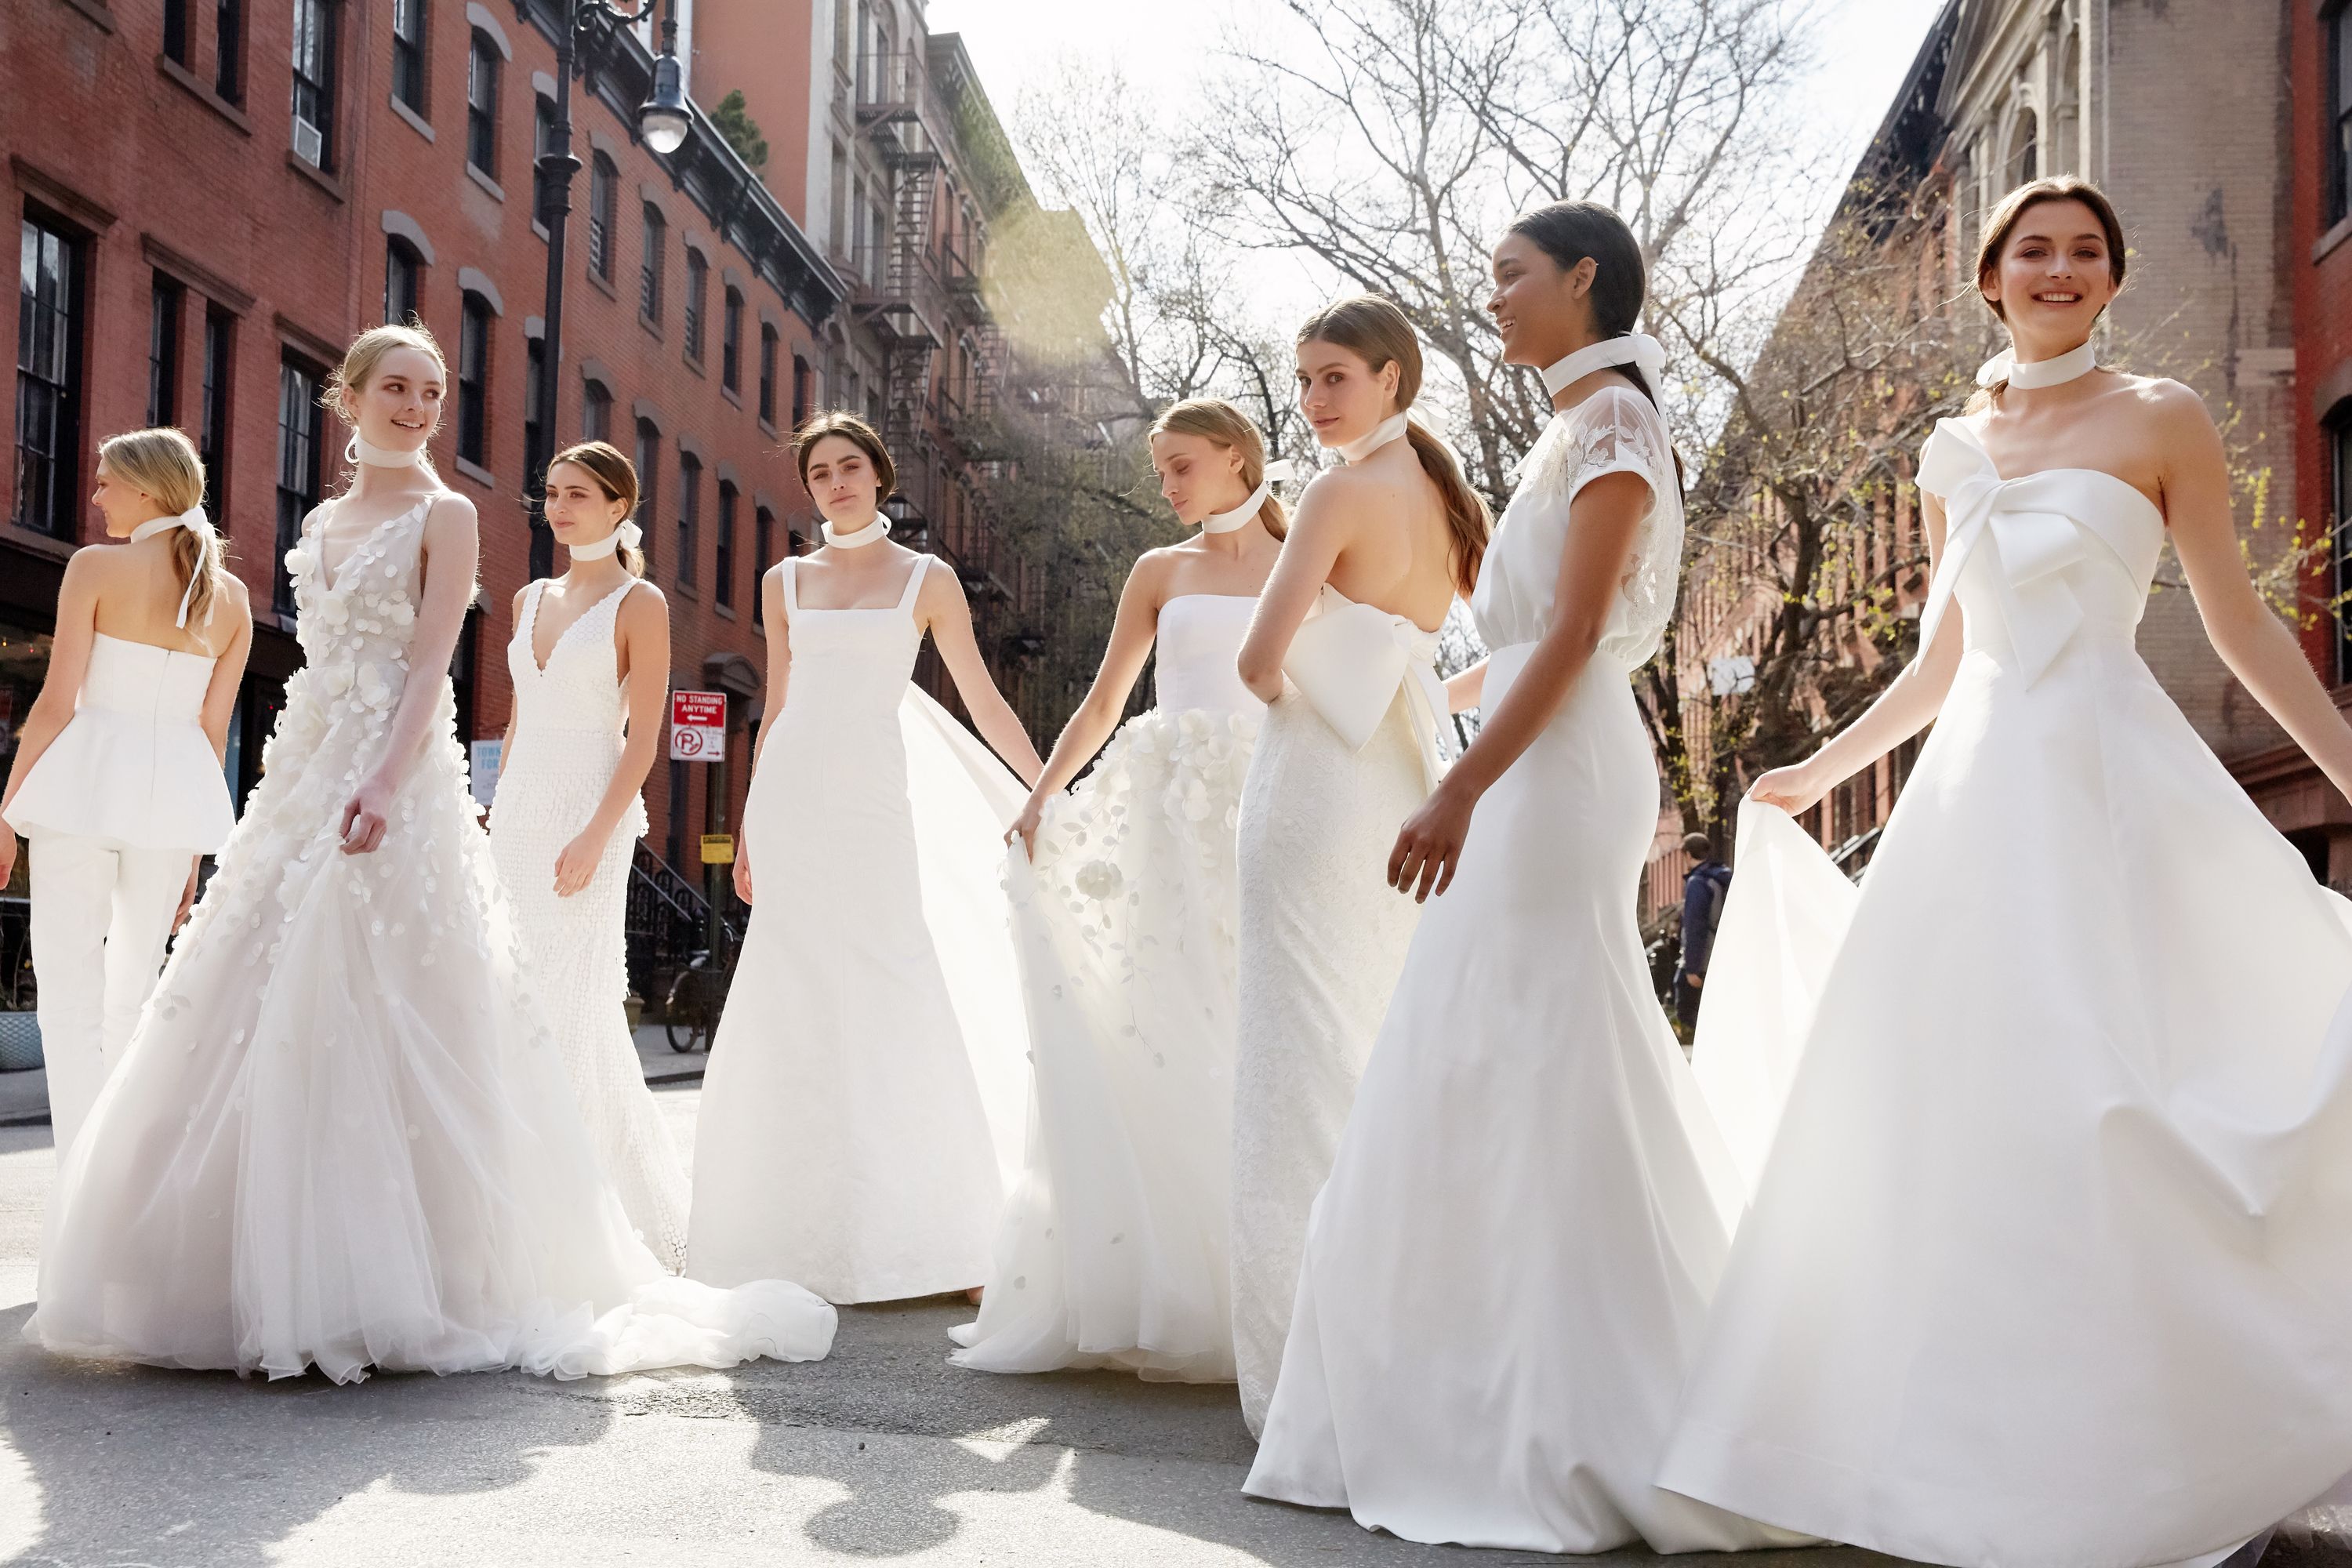 The 15 Best Bridesmaids Dresses With Sleeves